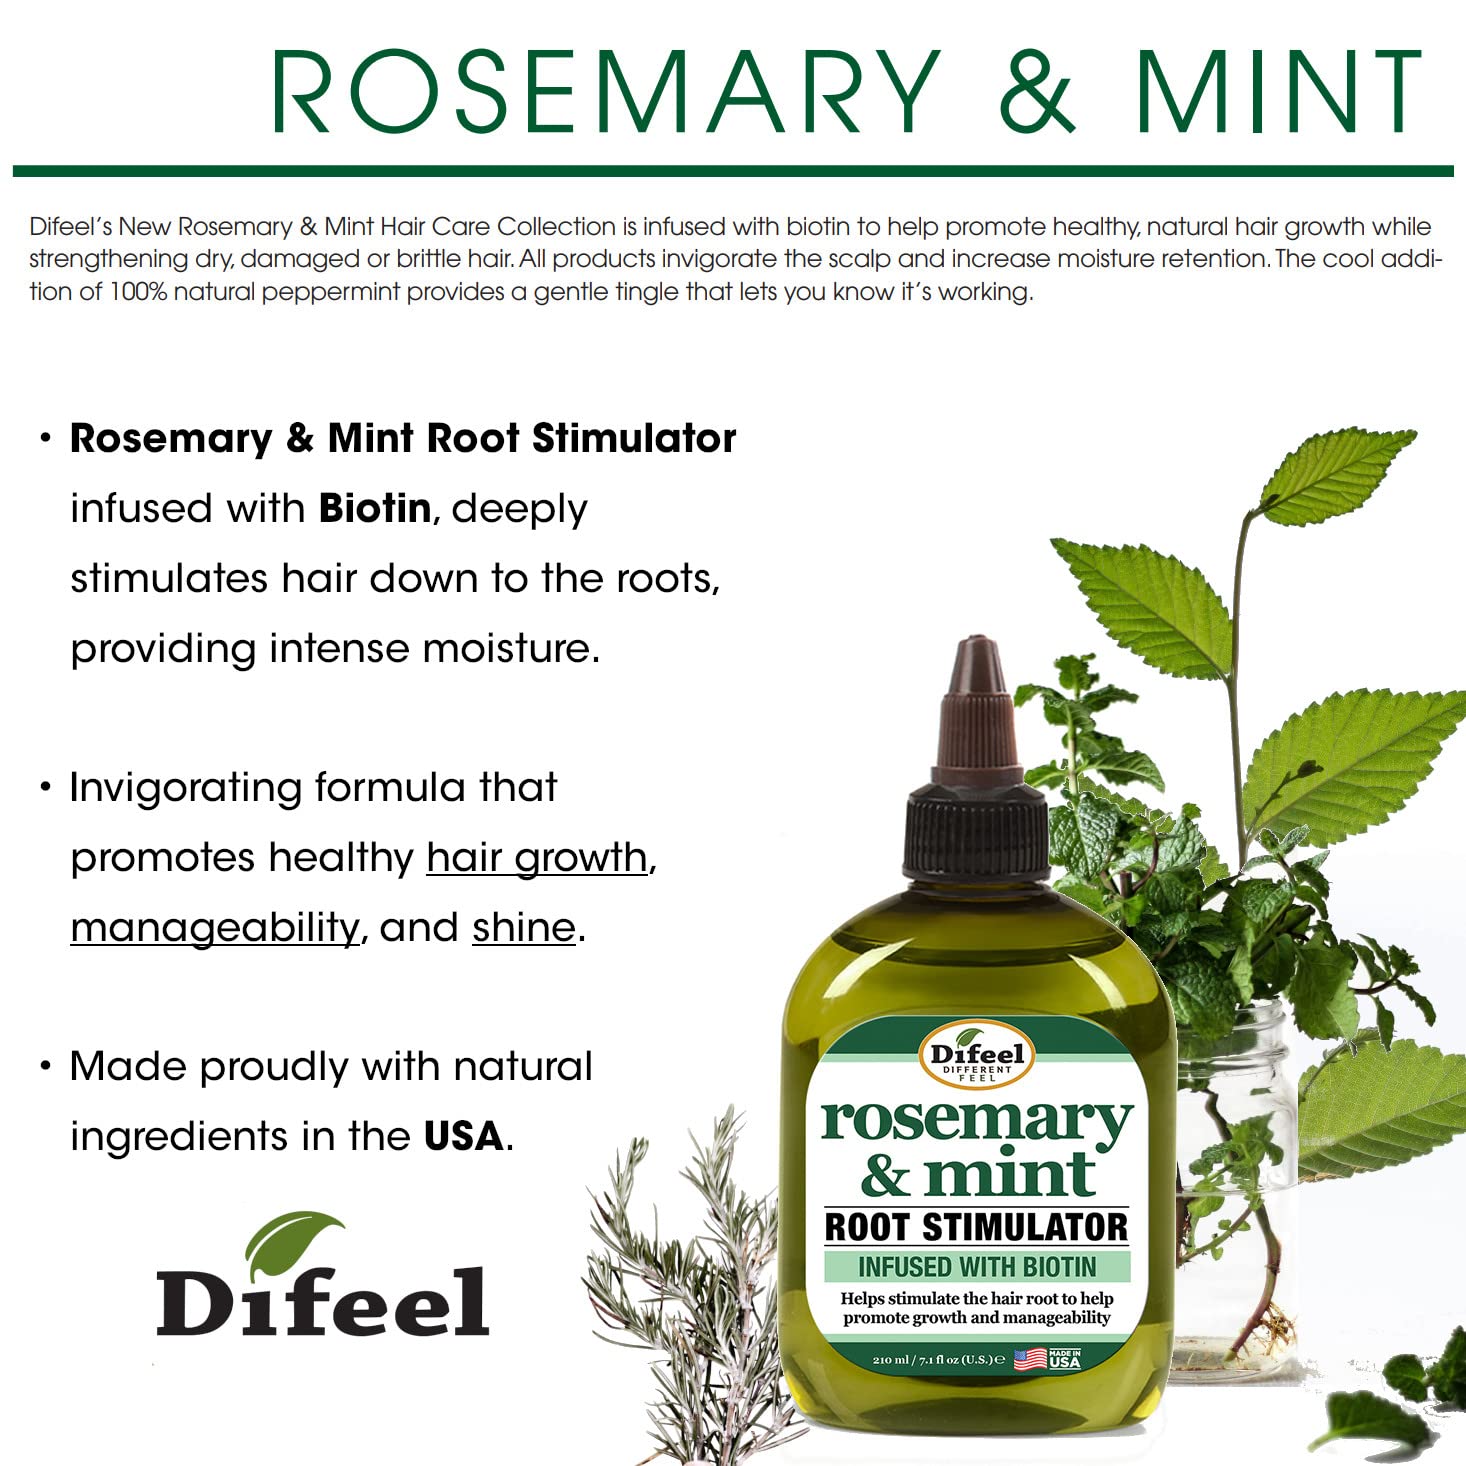 Difeel Rosemary and Mint Root Stimulator with Biotin 7.1 oz. - Hair Growth Scalp Treatment, Rosemary Mint Oil for Hair Growth